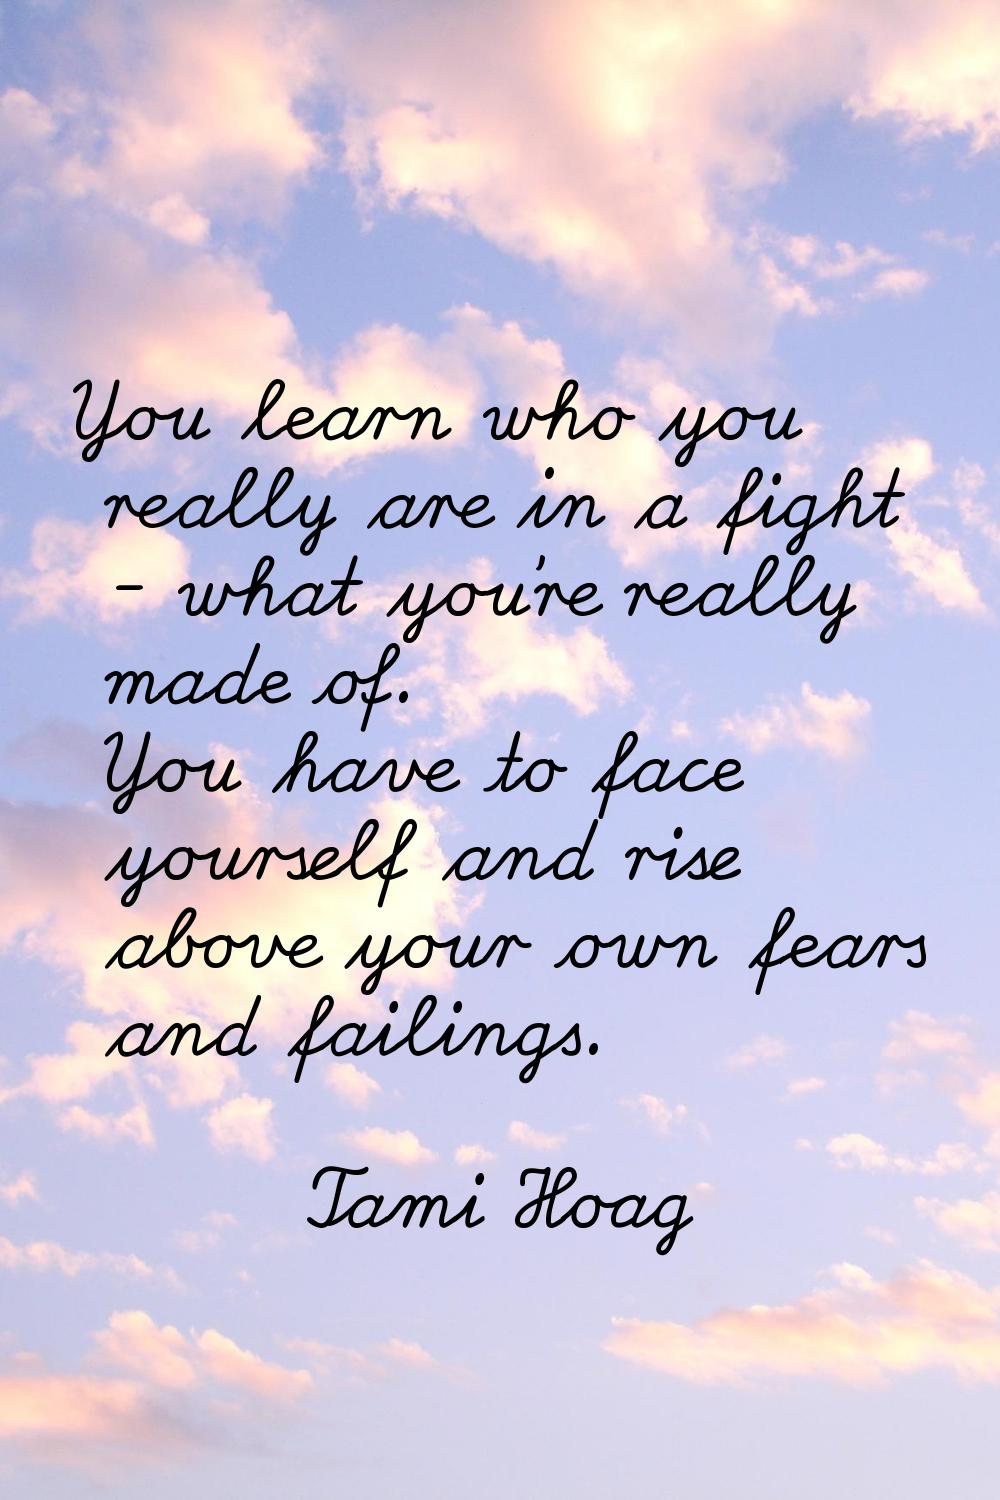 You learn who you really are in a fight - what you're really made of. You have to face yourself and